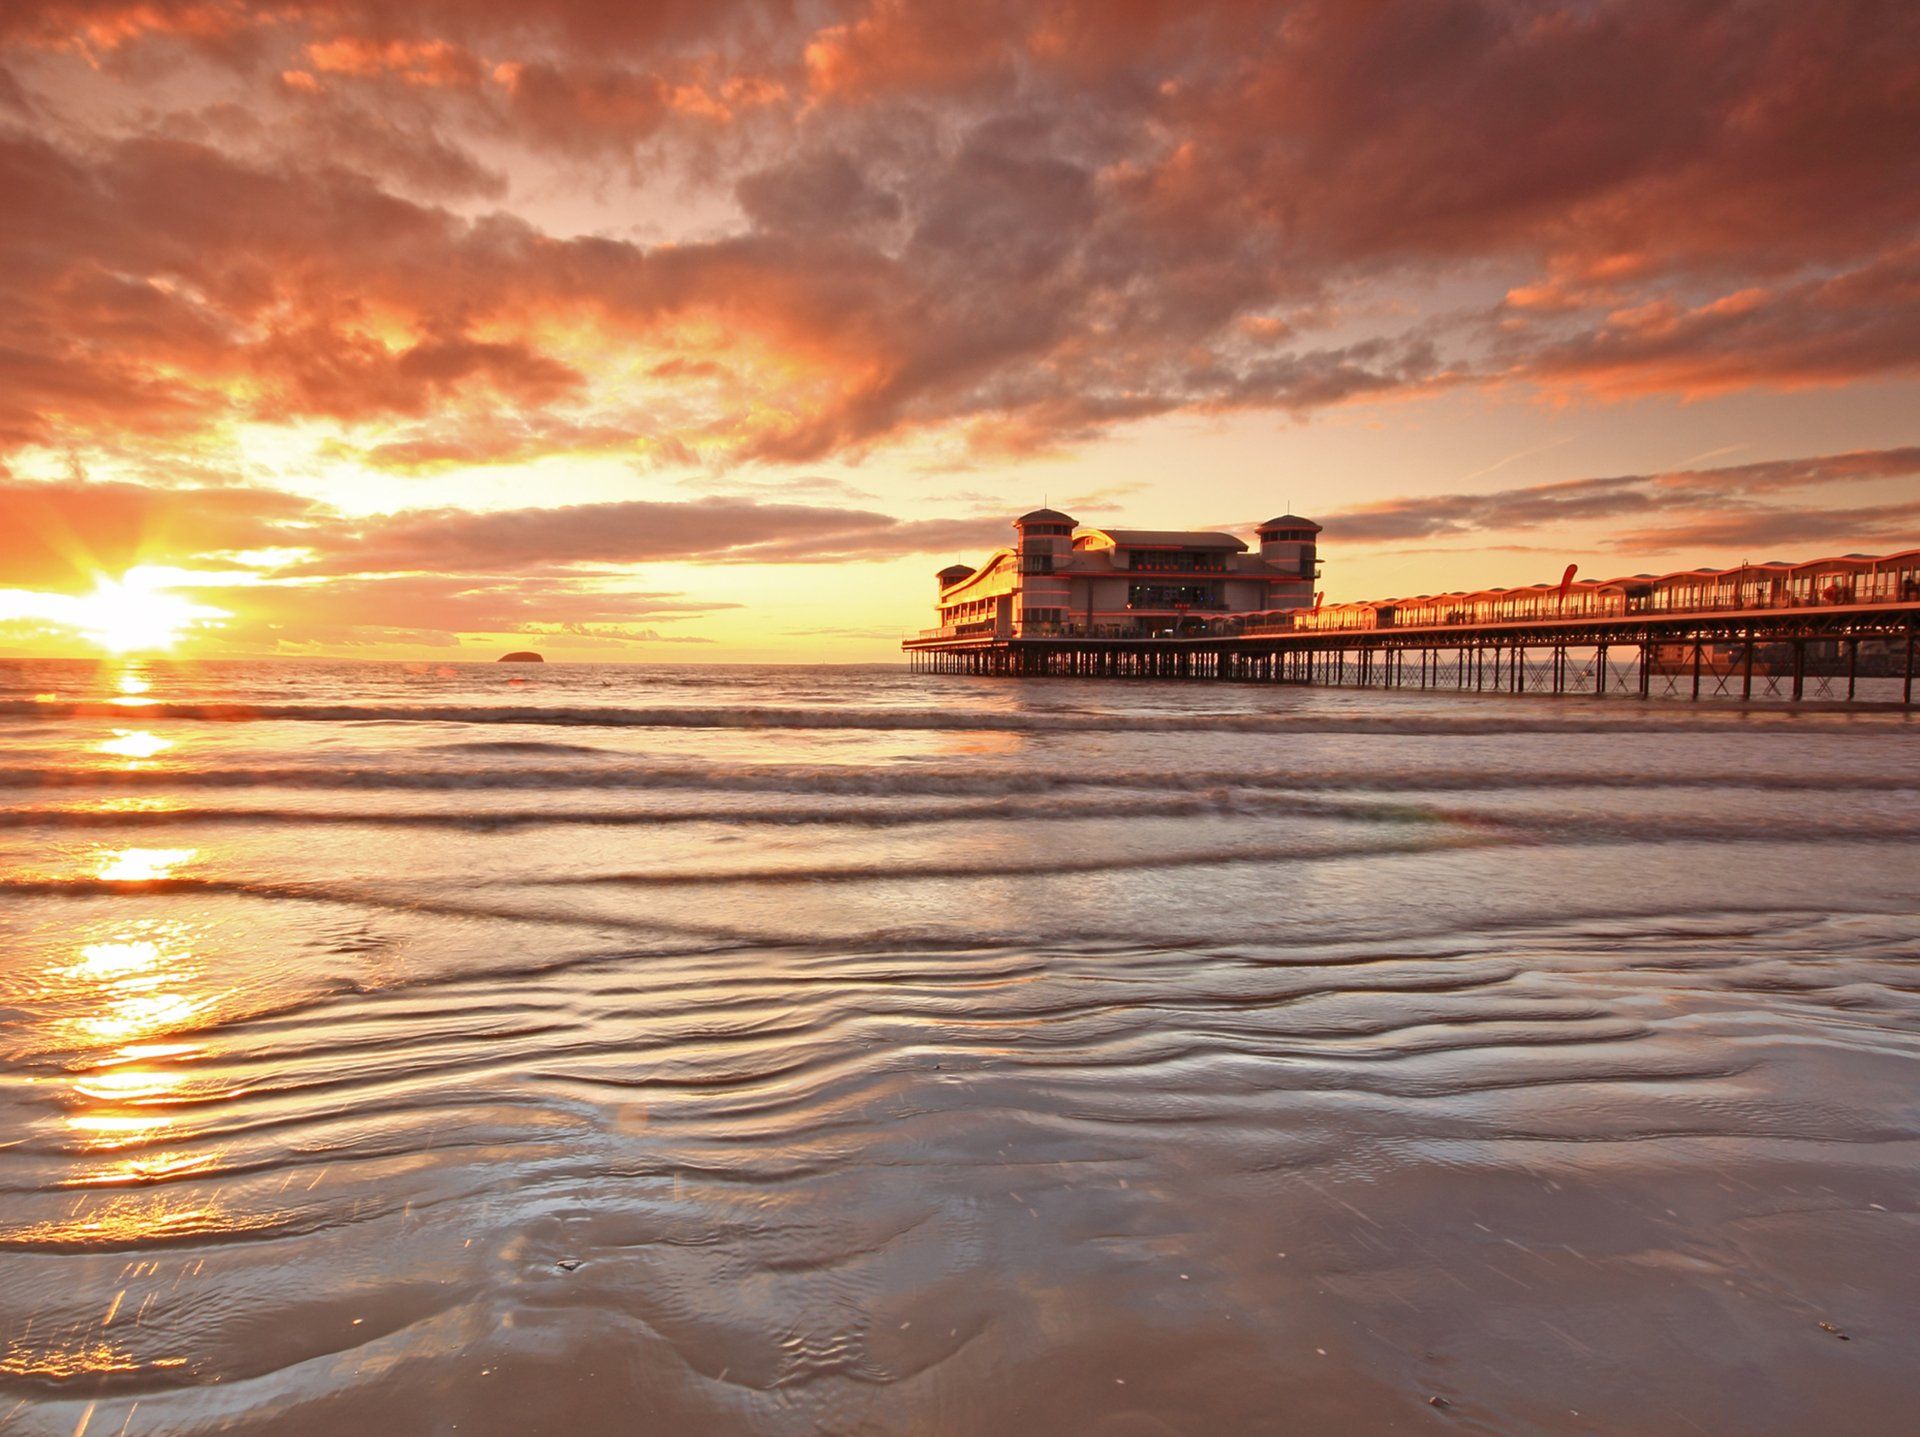 The sun sets behind the Grand Pier in Weston-super-Mare